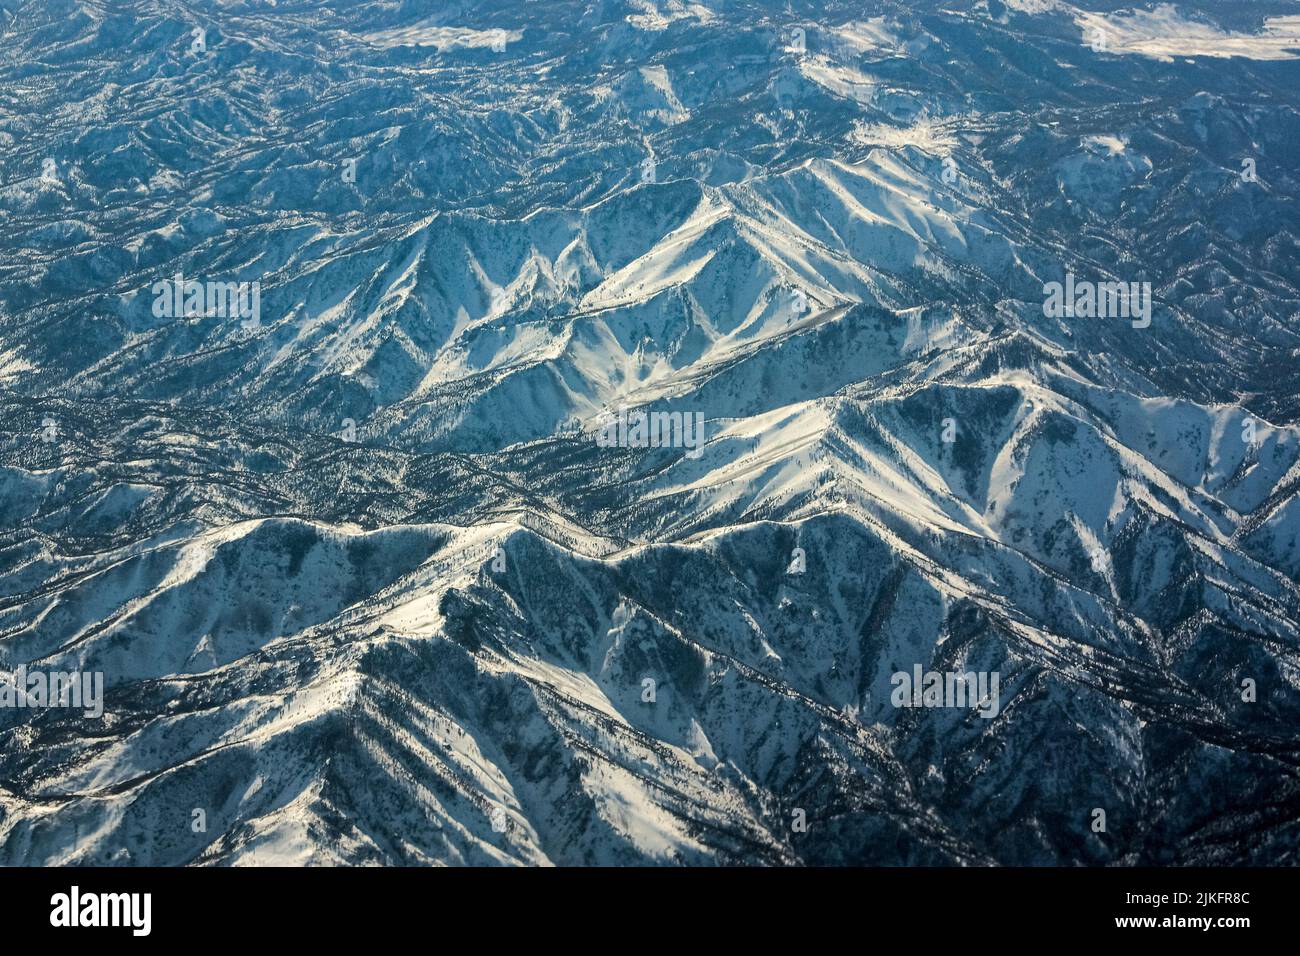 An aerial view of snowy mountains Stock Photo